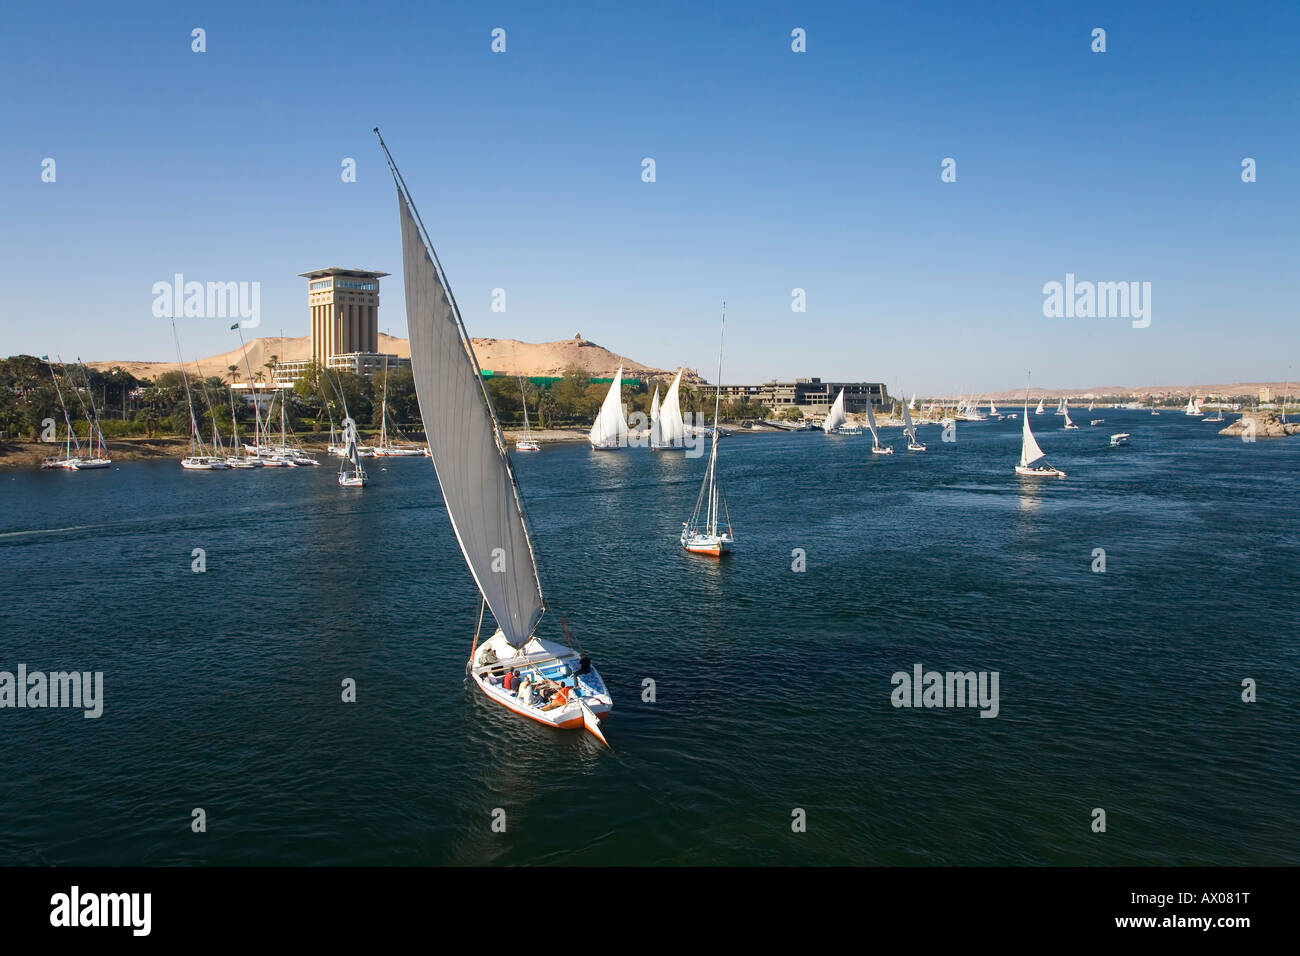 Felucca boats sailing on the River Nile in front of Hotel Oberoi in Aswan Upper Egypt North Africa Middle East Stock Photo